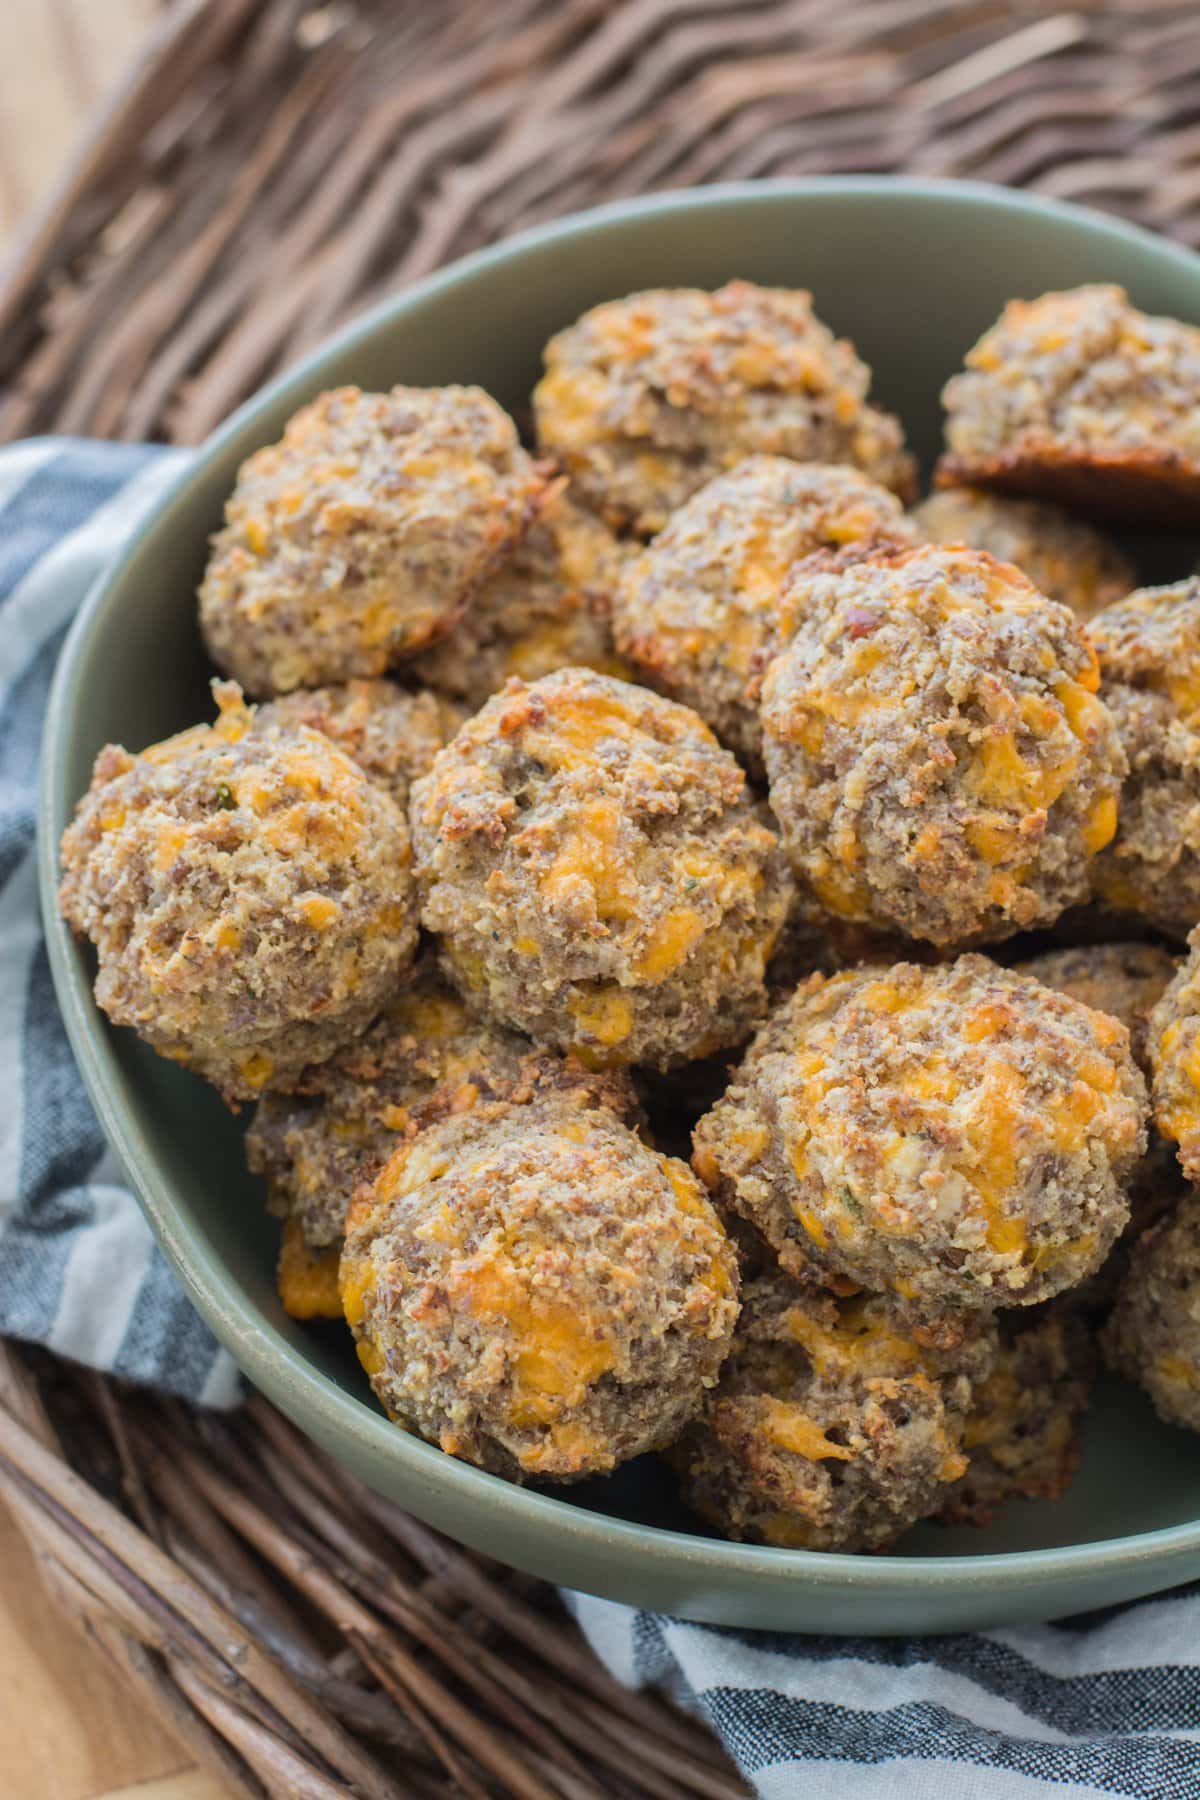 These easy Almond Flour Keto Sausage Balls are the perfect Keto appetizer, or great for keto meal prep! Less than one net carb per ball!